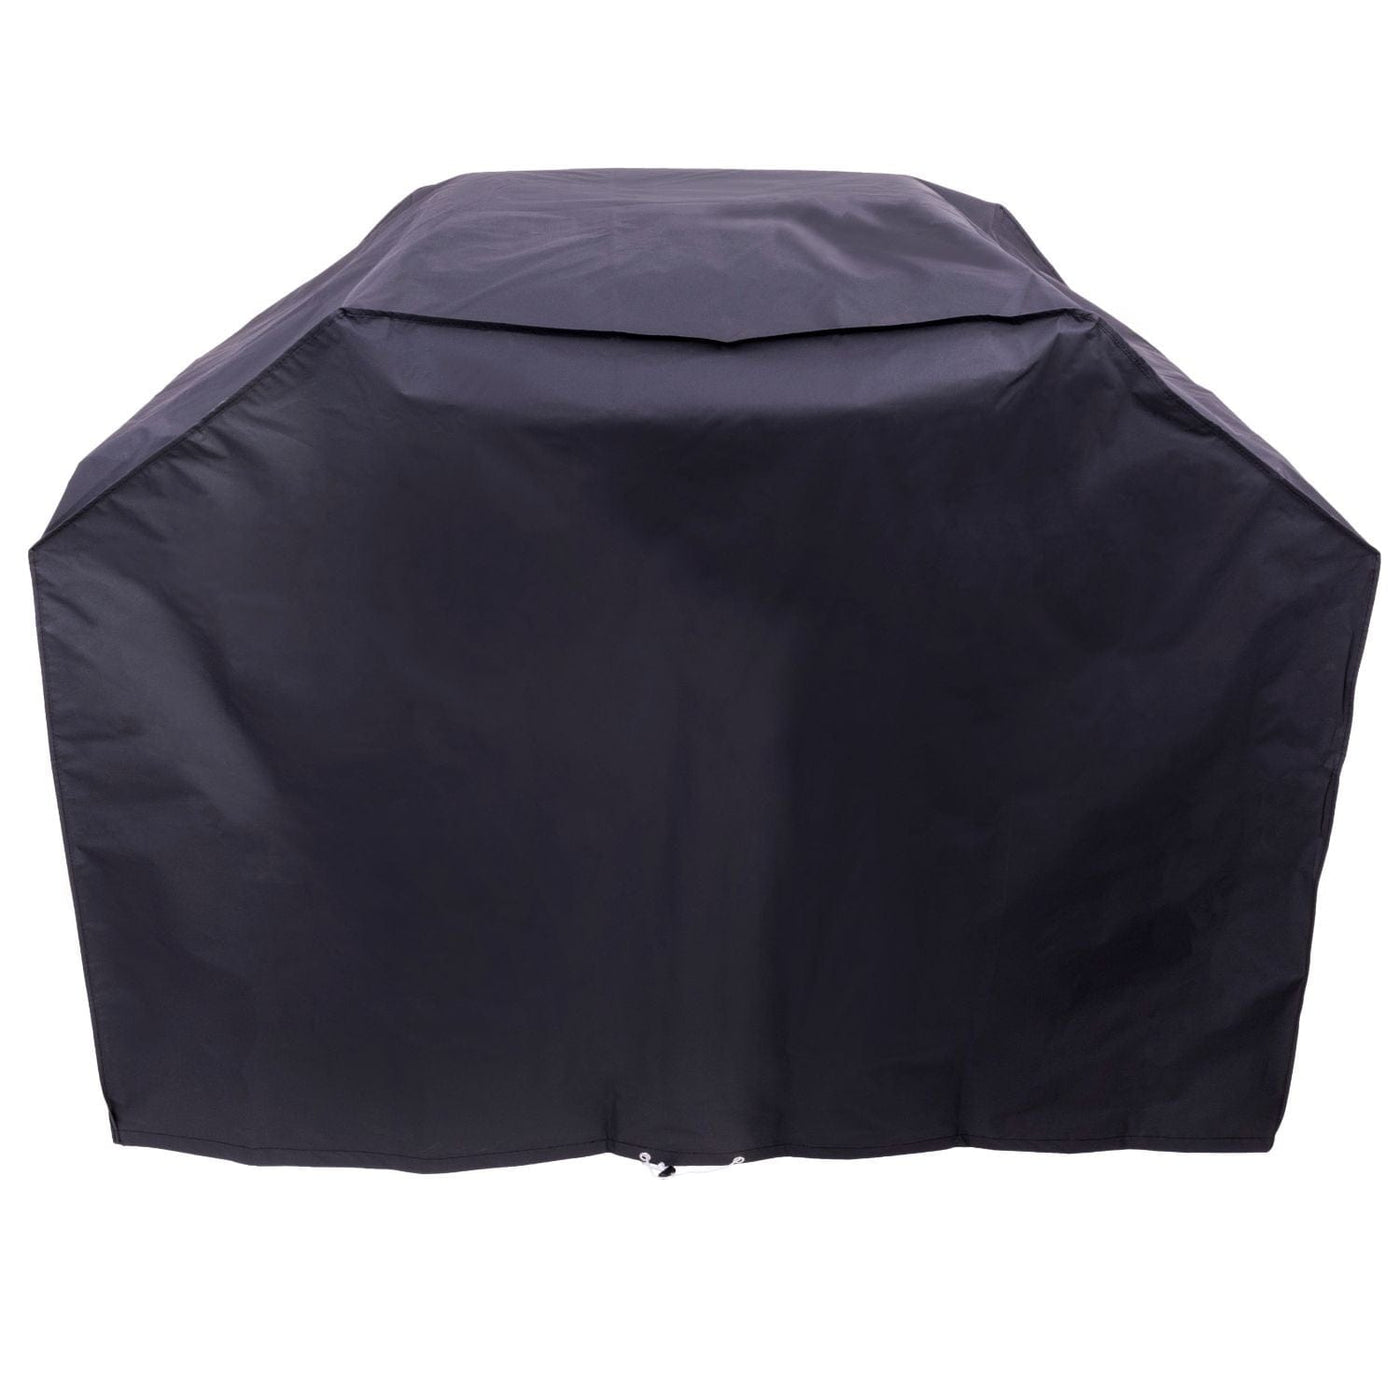 Char-Broil Char-Broil Large 3-4 Burner Basic Grill Cover Camping And Outdoor